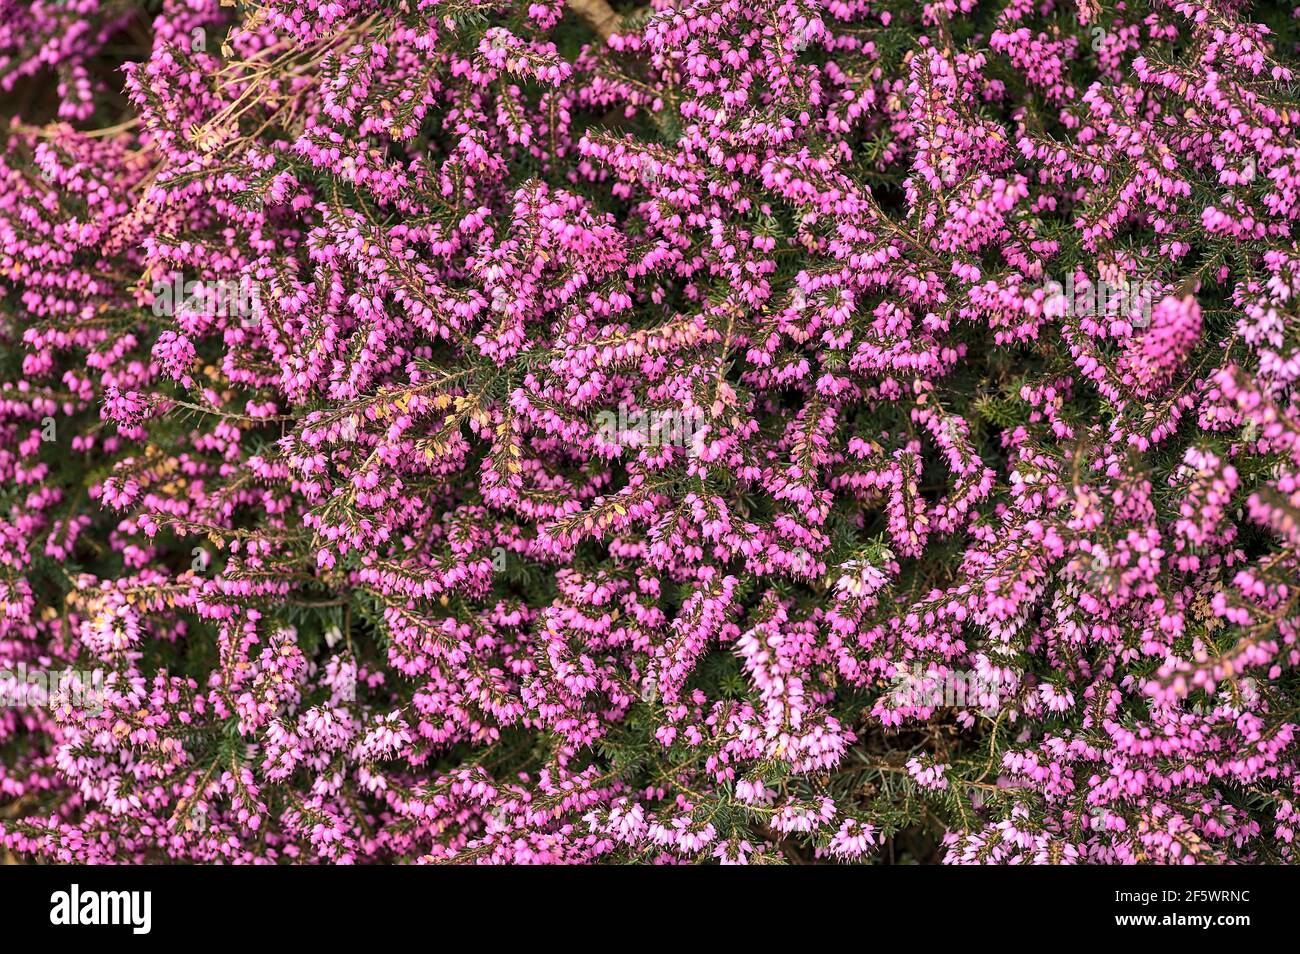 Beautiful uniform background of purple bell shaped heather (Erica cinerea) commonly growing in Great Britain and western Europe. High resolution Stock Photo